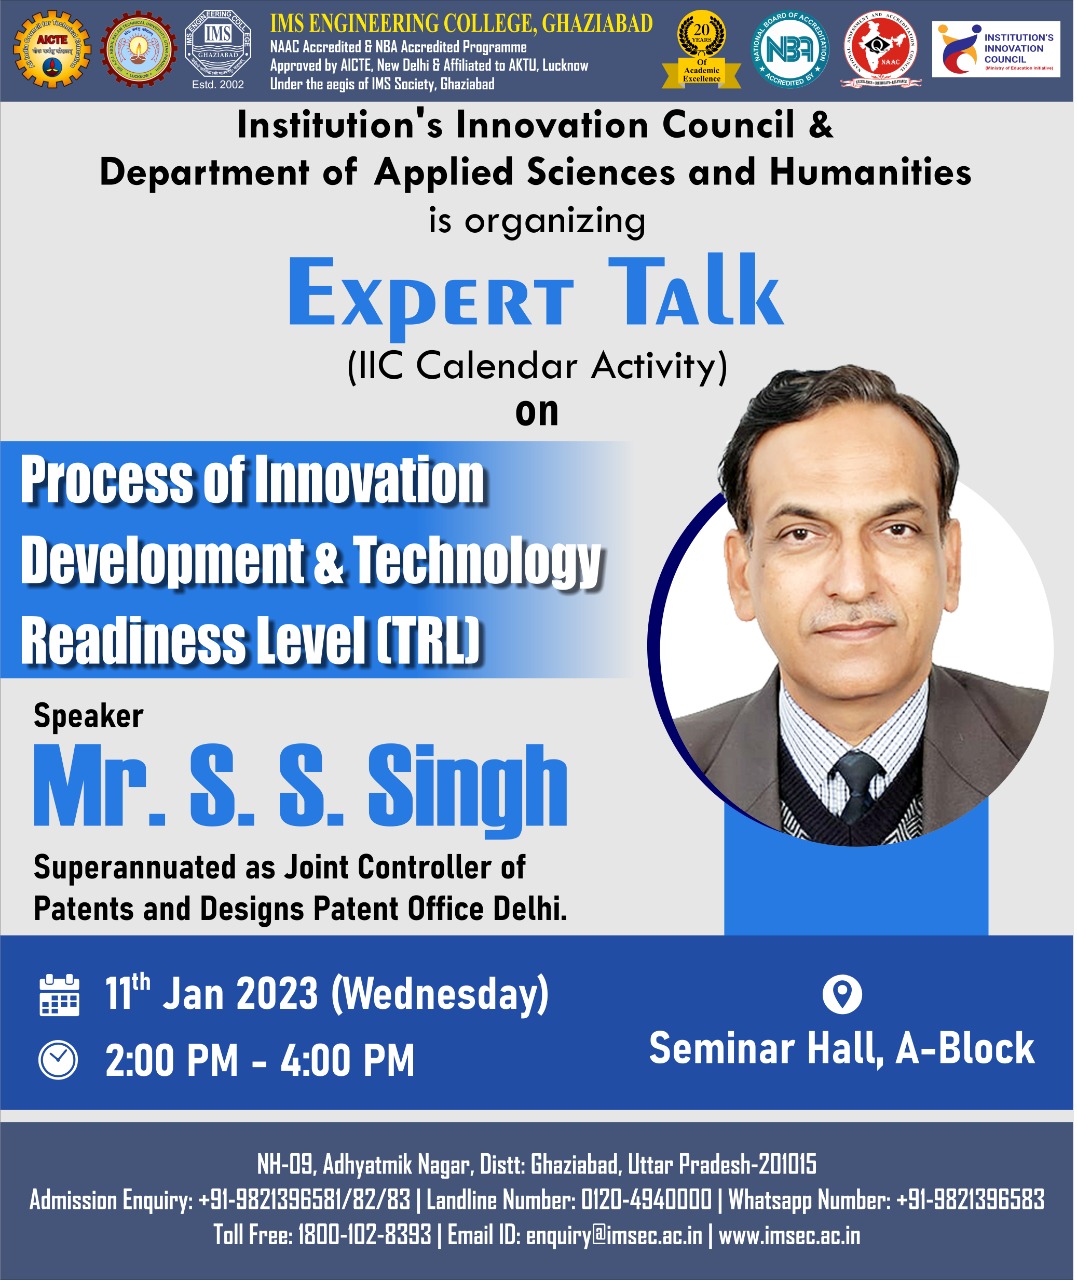 An Expert talk by Dr. S.S. Singh on the theme of Process of Innovation Development & Technology Readiness Level